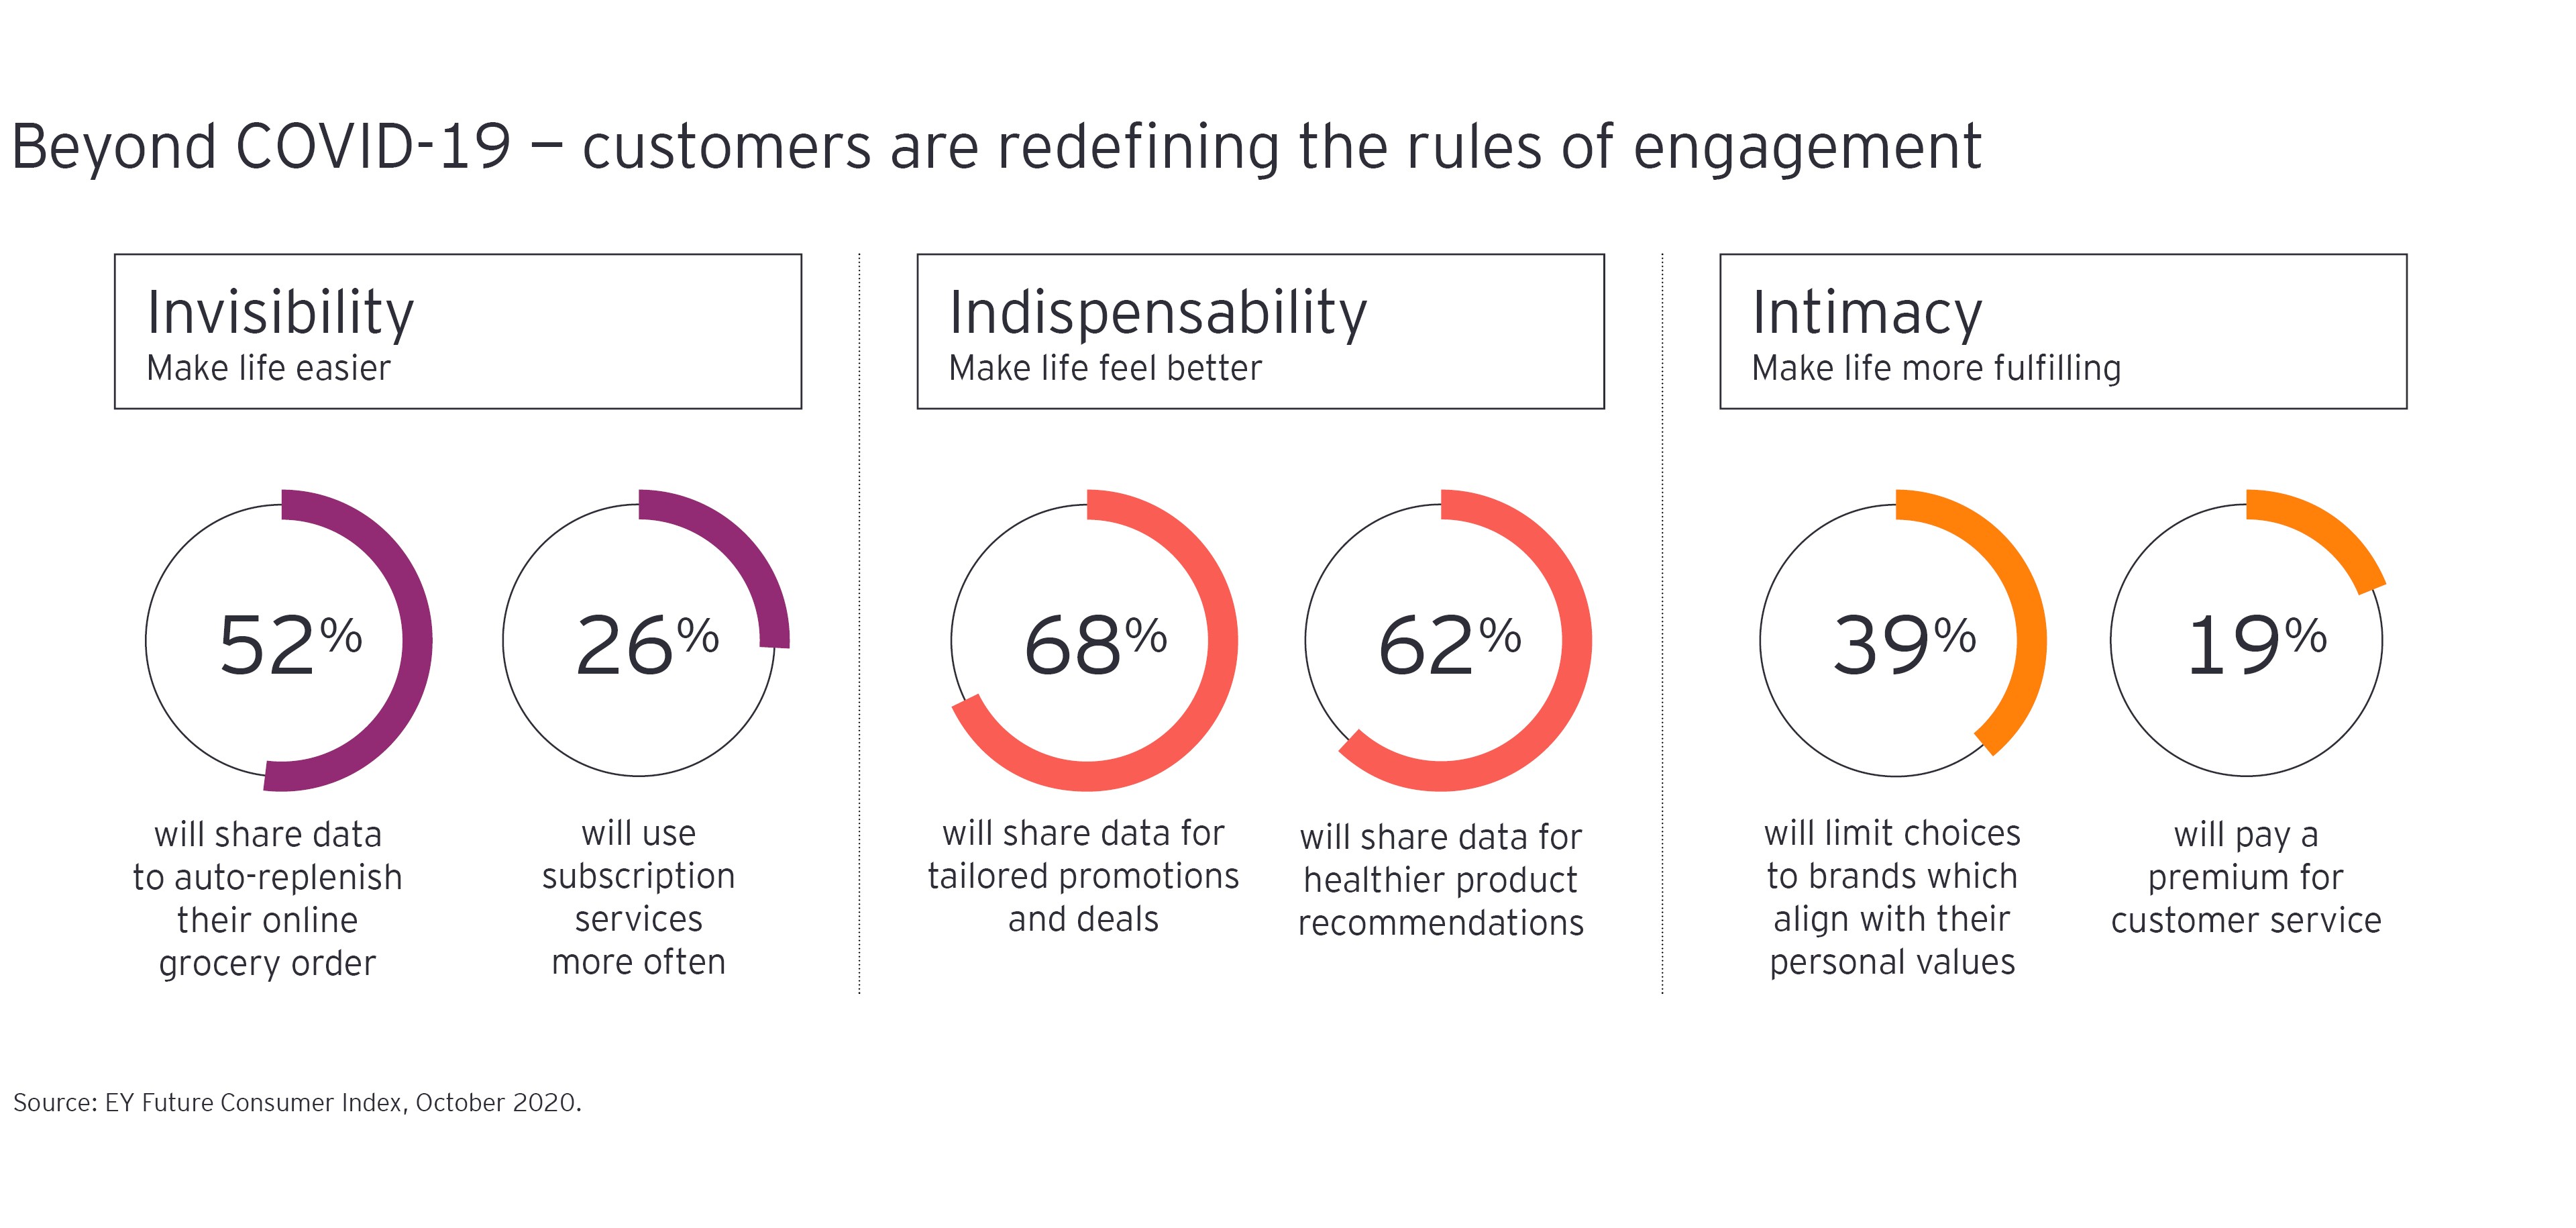 Beyond COVID-19: customers are redefining the rules of engagement